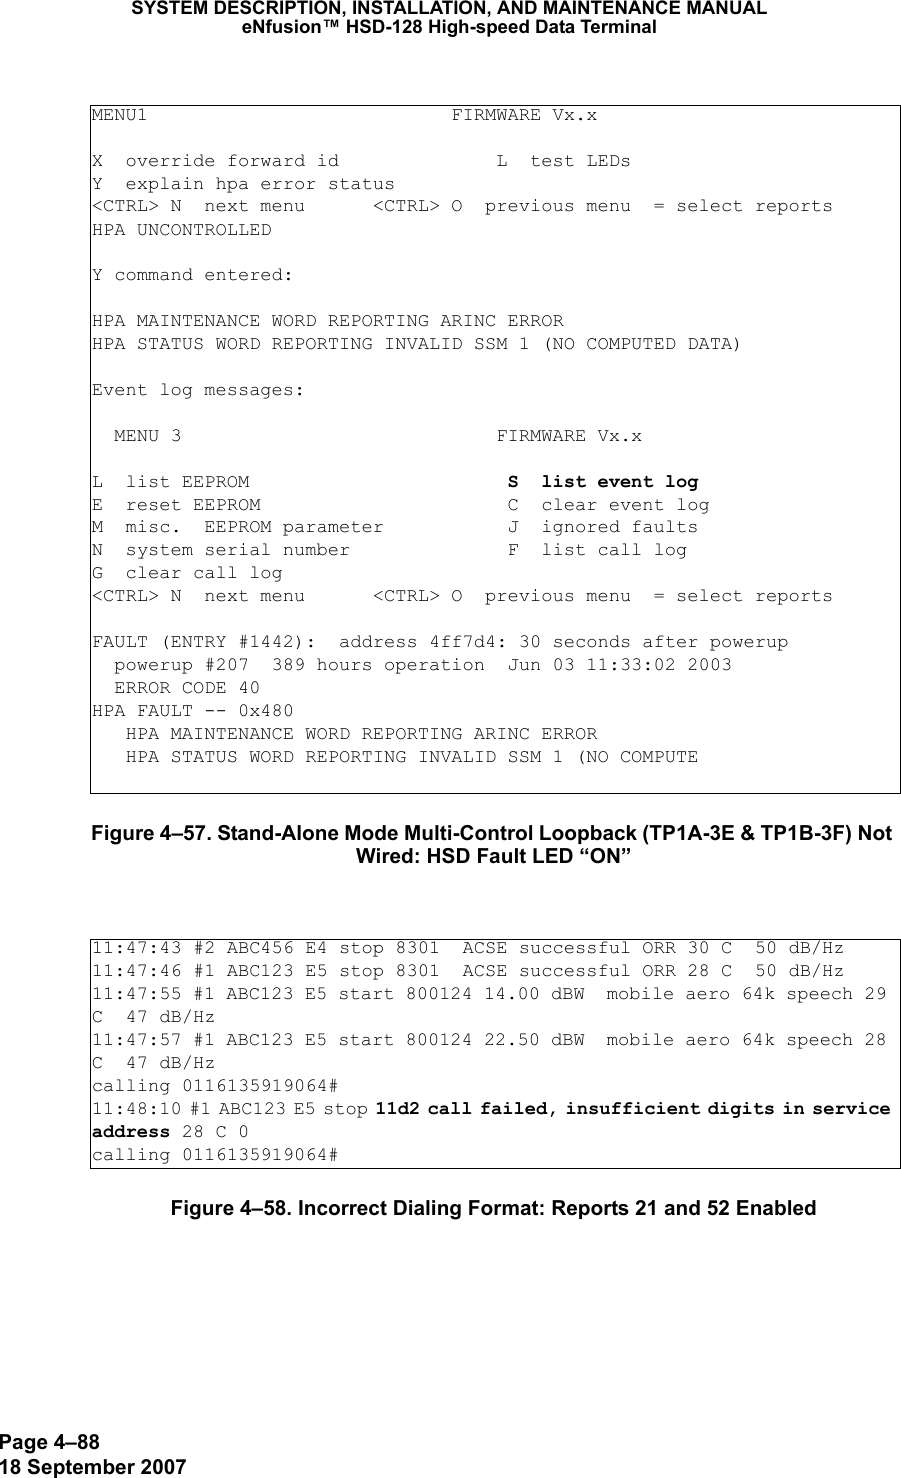 Page 4–8818 September 2007SYSTEM DESCRIPTION, INSTALLATION, AND MAINTENANCE MANUALeNfusion™ HSD-128 High-speed Data TerminalFigure 4–57. Stand-Alone Mode Multi-Control Loopback (TP1A-3E &amp; TP1B-3F) Not Wired: HSD Fault LED “ON”Figure 4–58. Incorrect Dialing Format: Reports 21 and 52 EnabledMENU1                           FIRMWARE Vx.xX  override forward id              L  test LEDsY  explain hpa error status&lt;CTRL&gt; N  next menu      &lt;CTRL&gt; O  previous menu  = select reportsHPA UNCONTROLLEDY command entered:HPA MAINTENANCE WORD REPORTING ARINC ERRORHPA STATUS WORD REPORTING INVALID SSM 1 (NO COMPUTED DATA)Event log messages:   MENU 3                            FIRMWARE Vx.xL  list EEPROM                       S  list event logE  reset EEPROM                      C  clear event logM  misc.  EEPROM parameter           J  ignored faultsN  system serial number              F  list call logG  clear call log&lt;CTRL&gt; N  next menu      &lt;CTRL&gt; O  previous menu  = select reportsFAULT (ENTRY #1442):  address 4ff7d4: 30 seconds after powerup  powerup #207  389 hours operation  Jun 03 11:33:02 2003  ERROR CODE 40HPA FAULT -- 0x480   HPA MAINTENANCE WORD REPORTING ARINC ERROR   HPA STATUS WORD REPORTING INVALID SSM 1 (NO COMPUTE11:47:43 #2 ABC456 E4 stop 8301  ACSE successful ORR 30 C  50 dB/Hz11:47:46 #1 ABC123 E5 stop 8301  ACSE successful ORR 28 C  50 dB/Hz11:47:55 #1 ABC123 E5 start 800124 14.00 dBW  mobile aero 64k speech 29 C  47 dB/Hz11:47:57 #1 ABC123 E5 start 800124 22.50 dBW  mobile aero 64k speech 28 C  47 dB/Hzcalling 0116135919064#11:48:10 #1 ABC123 E5 stop 11d2 call failed, insufficient digits in service address 28 C 0 calling 0116135919064#